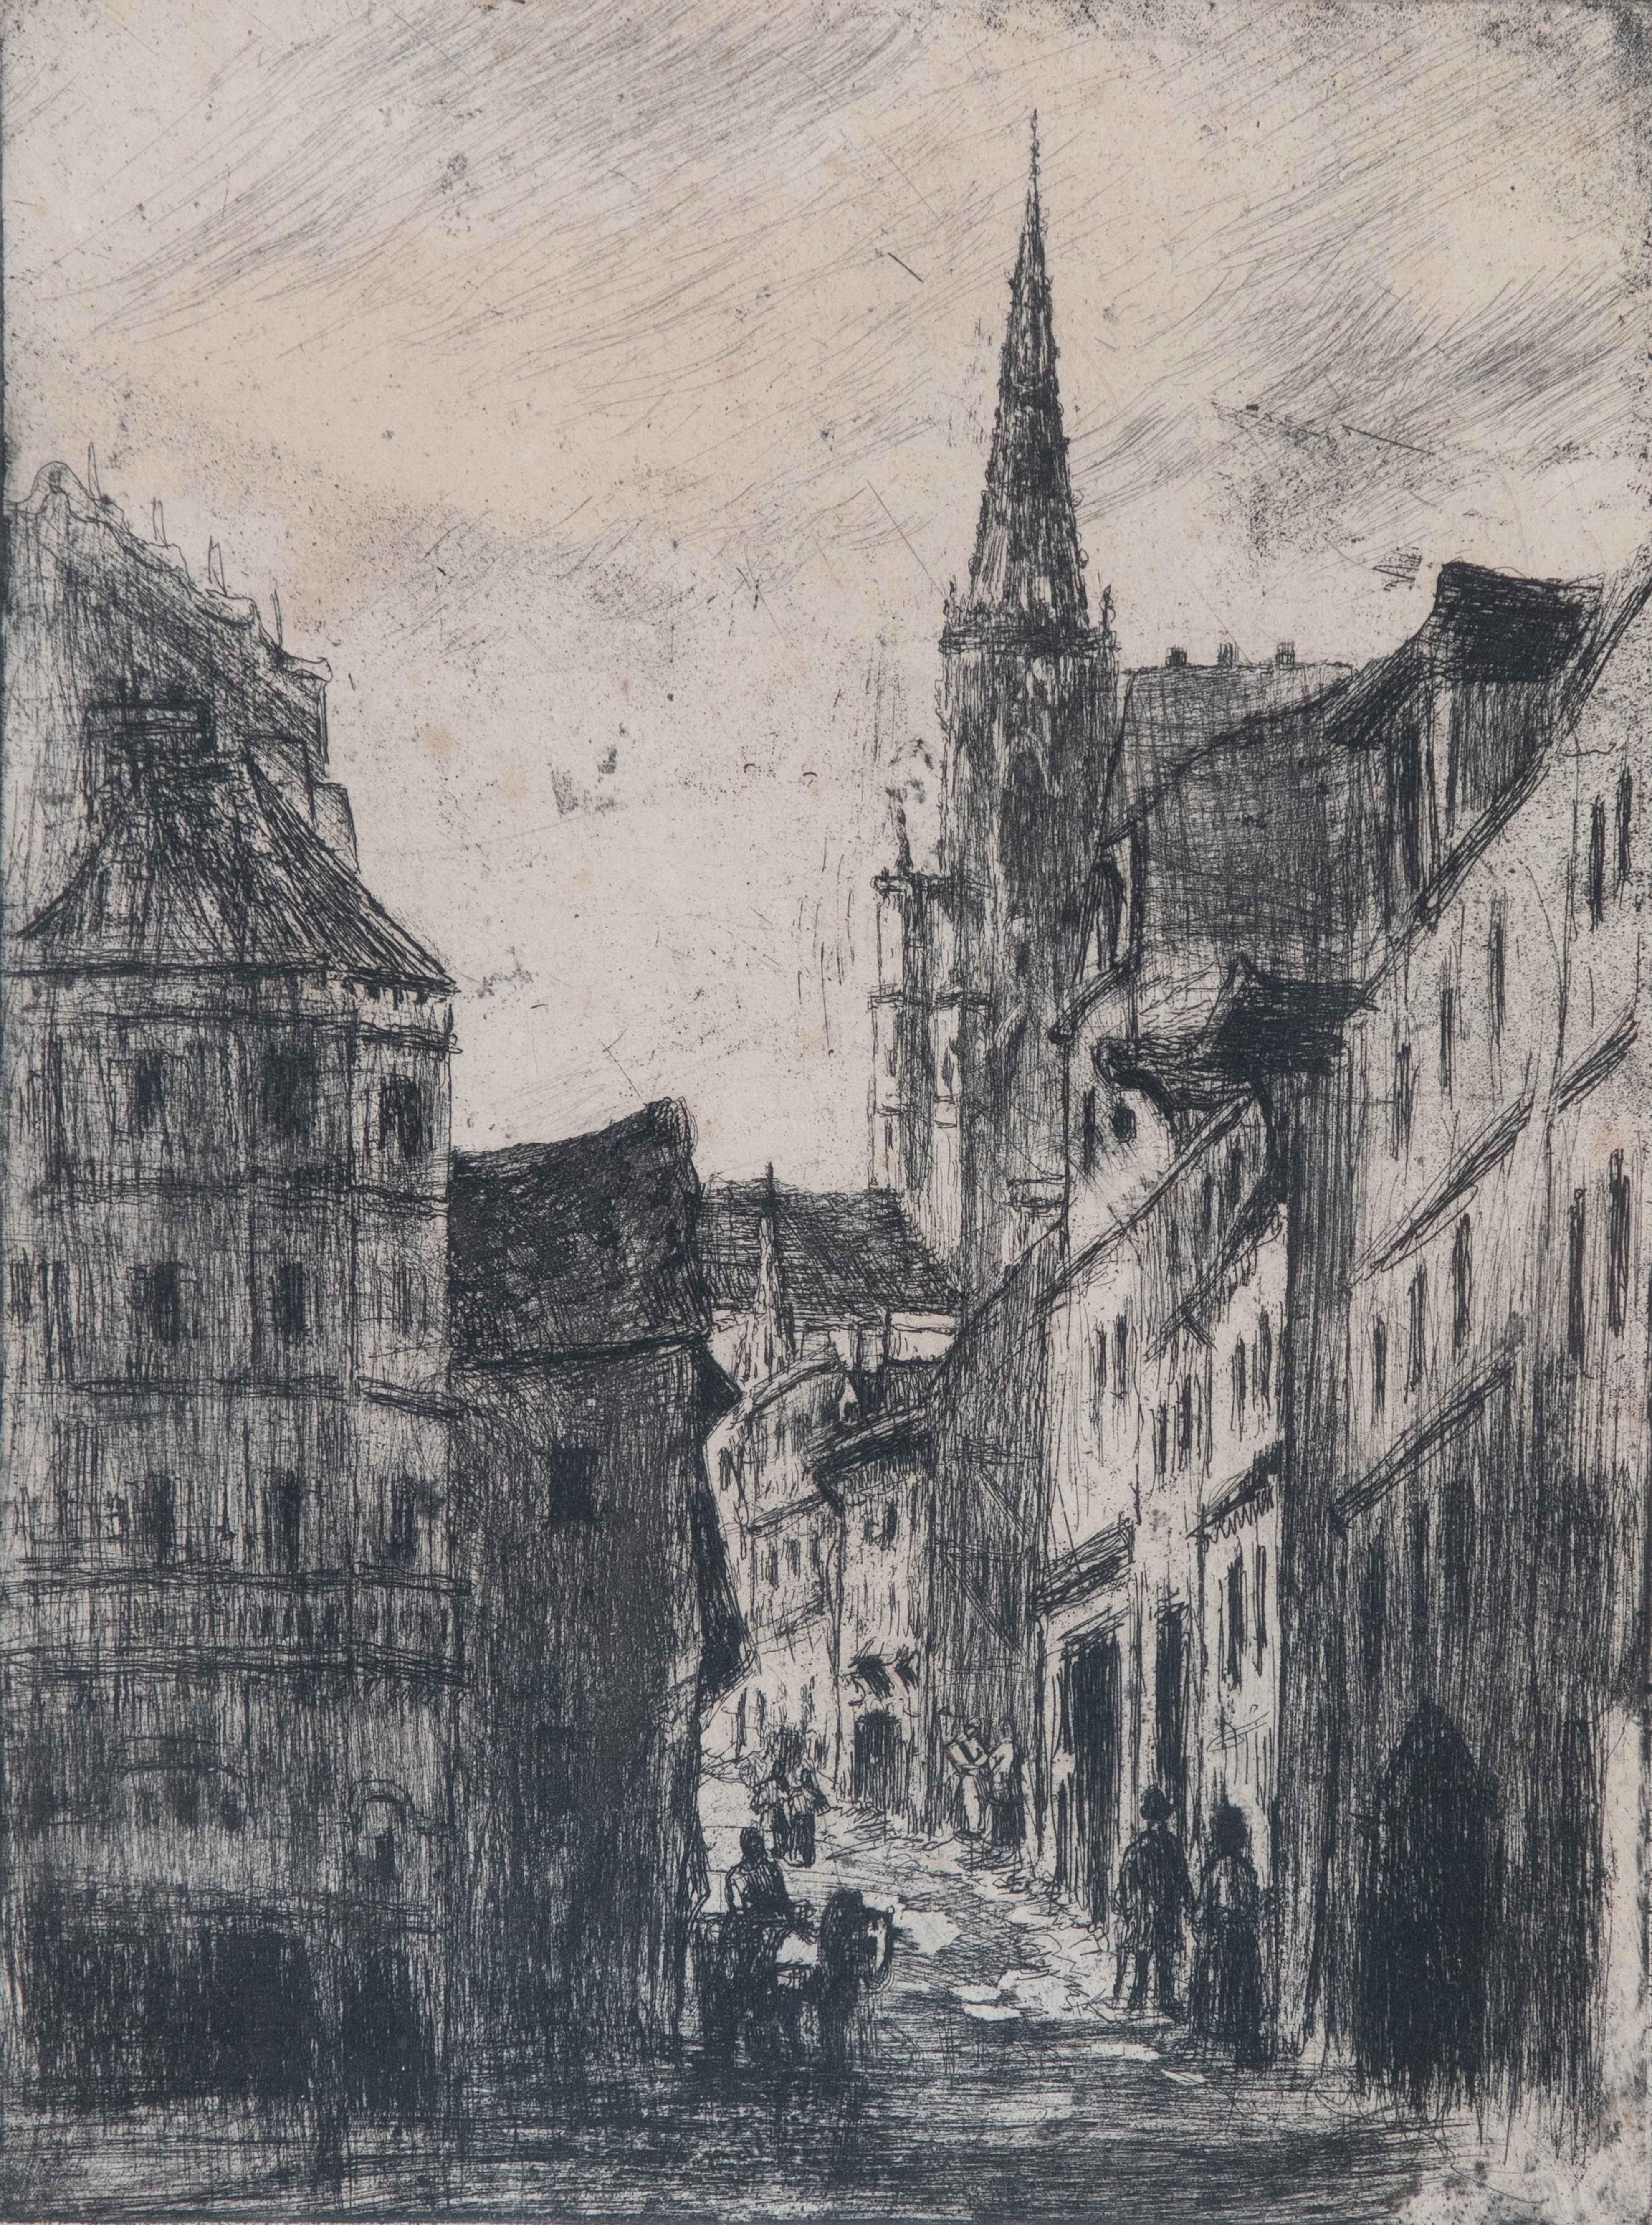 La Rue Malpolue, à Rouen by Camille Pissarro (1830-1903)
Etching
19.8 x 15 cm (7 ³/₄ x 5 ⁷/₈ inches)
Stamped lower right, C.P. and numbered 18
Created in 1883-84 (printed at a later date as a part of a limited posthumous edition)
Delteil